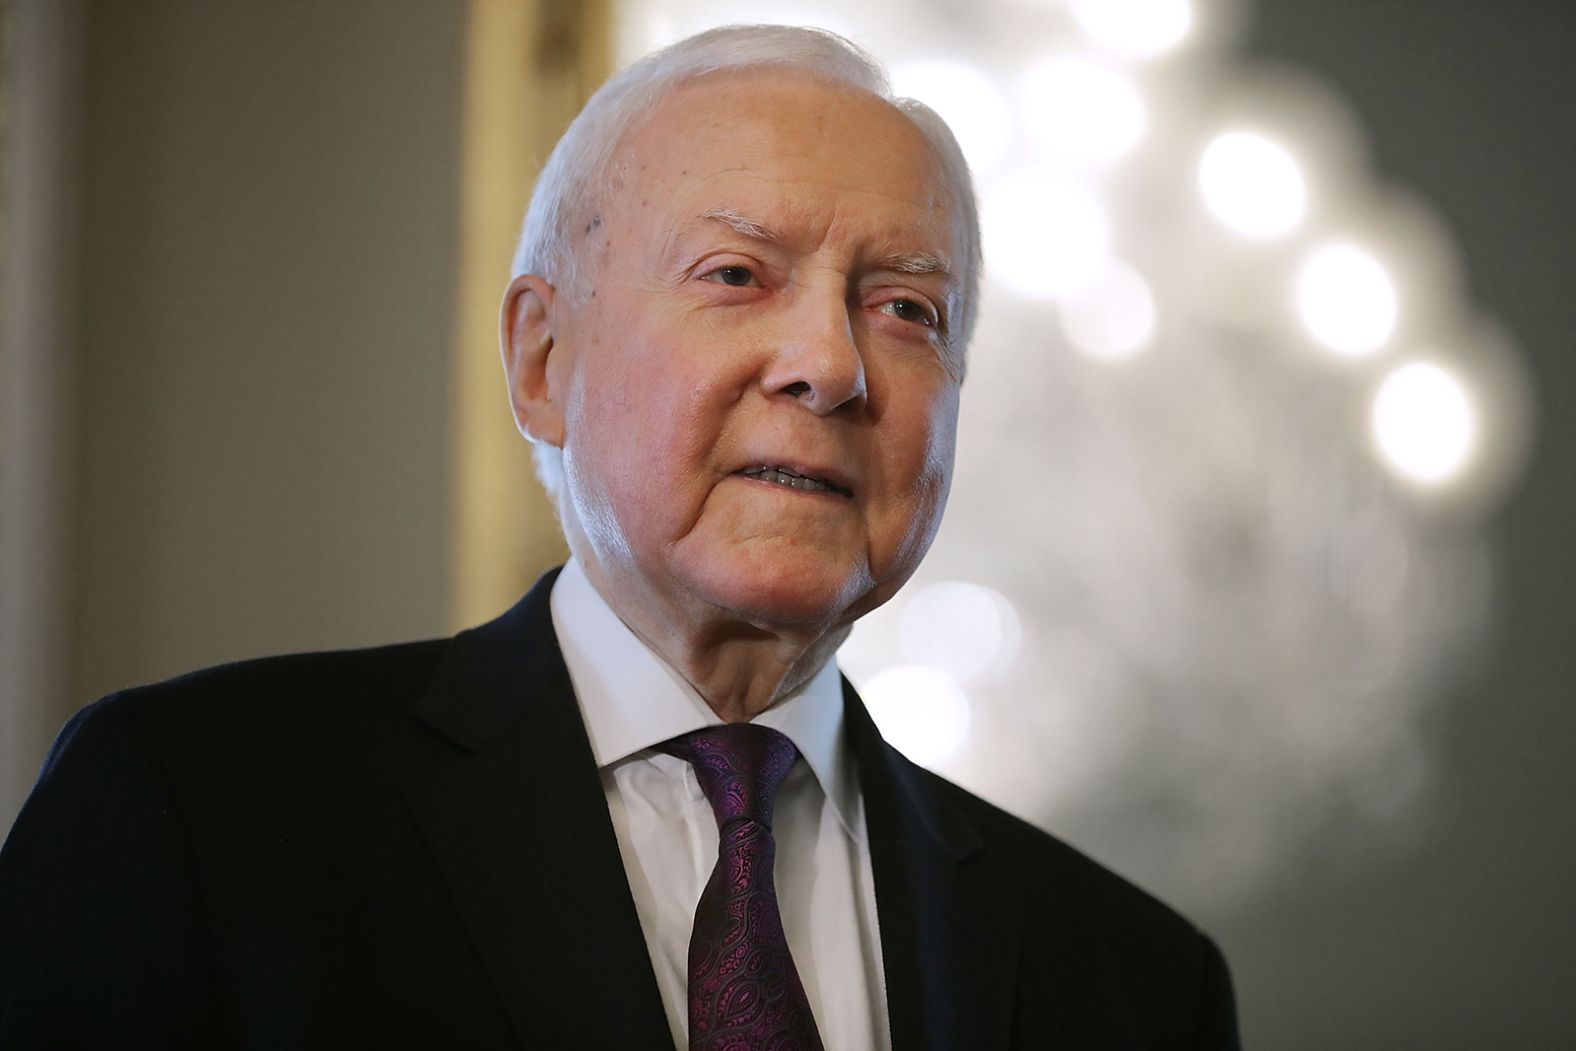 Former US Sen. <a href="index.php?page=&url=https%3A%2F%2Fwww.cnn.com%2F2022%2F04%2F23%2Fpolitics%2Fformer-senator-orrin-hatch-dies%2Findex.html" target="_blank">Orrin Hatch</a> of Utah, the longest-serving Republican senator in US history, died April 23 at the age of 88. Hatch served in the chamber for 42 years, from 1977 to 2019.